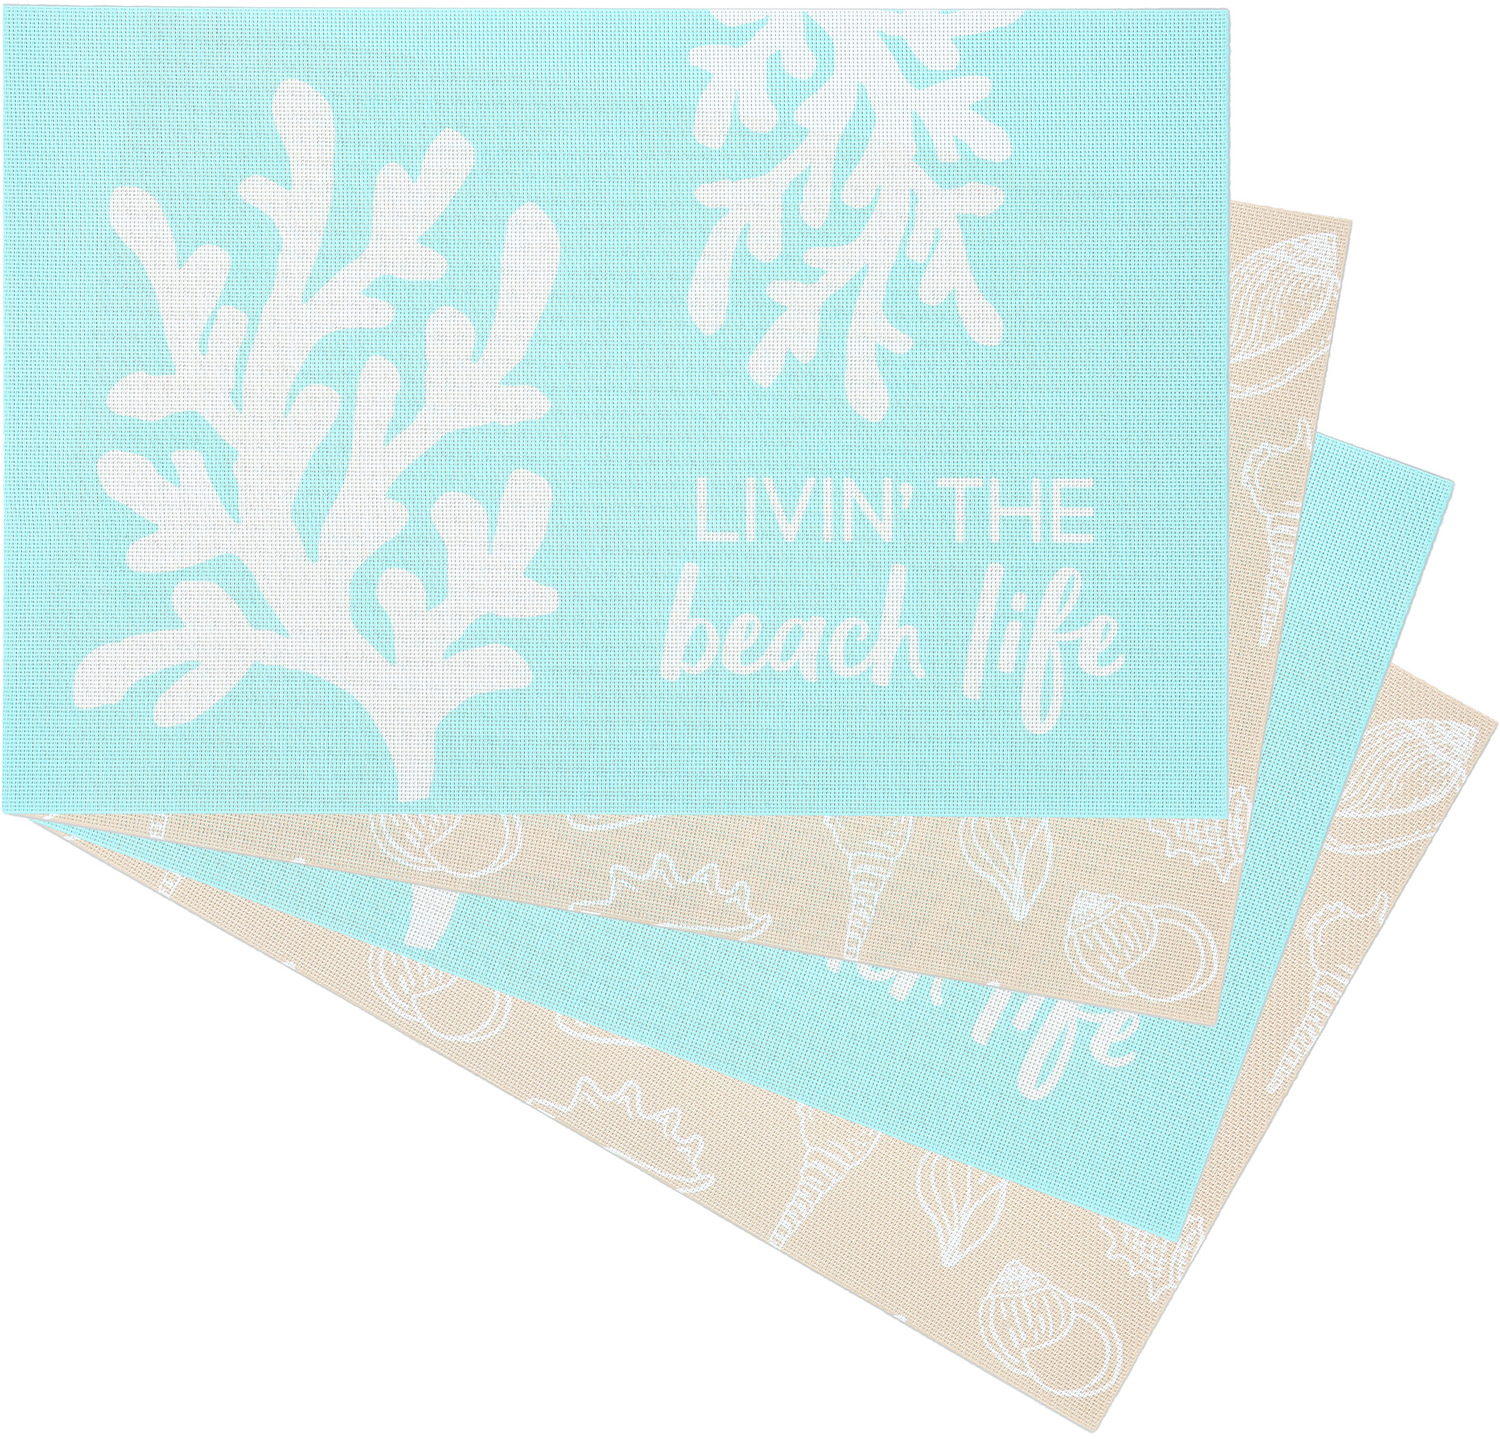 Beach by We People - Beach - Placemat Gift Set (4 - 17.75" x 11.75")